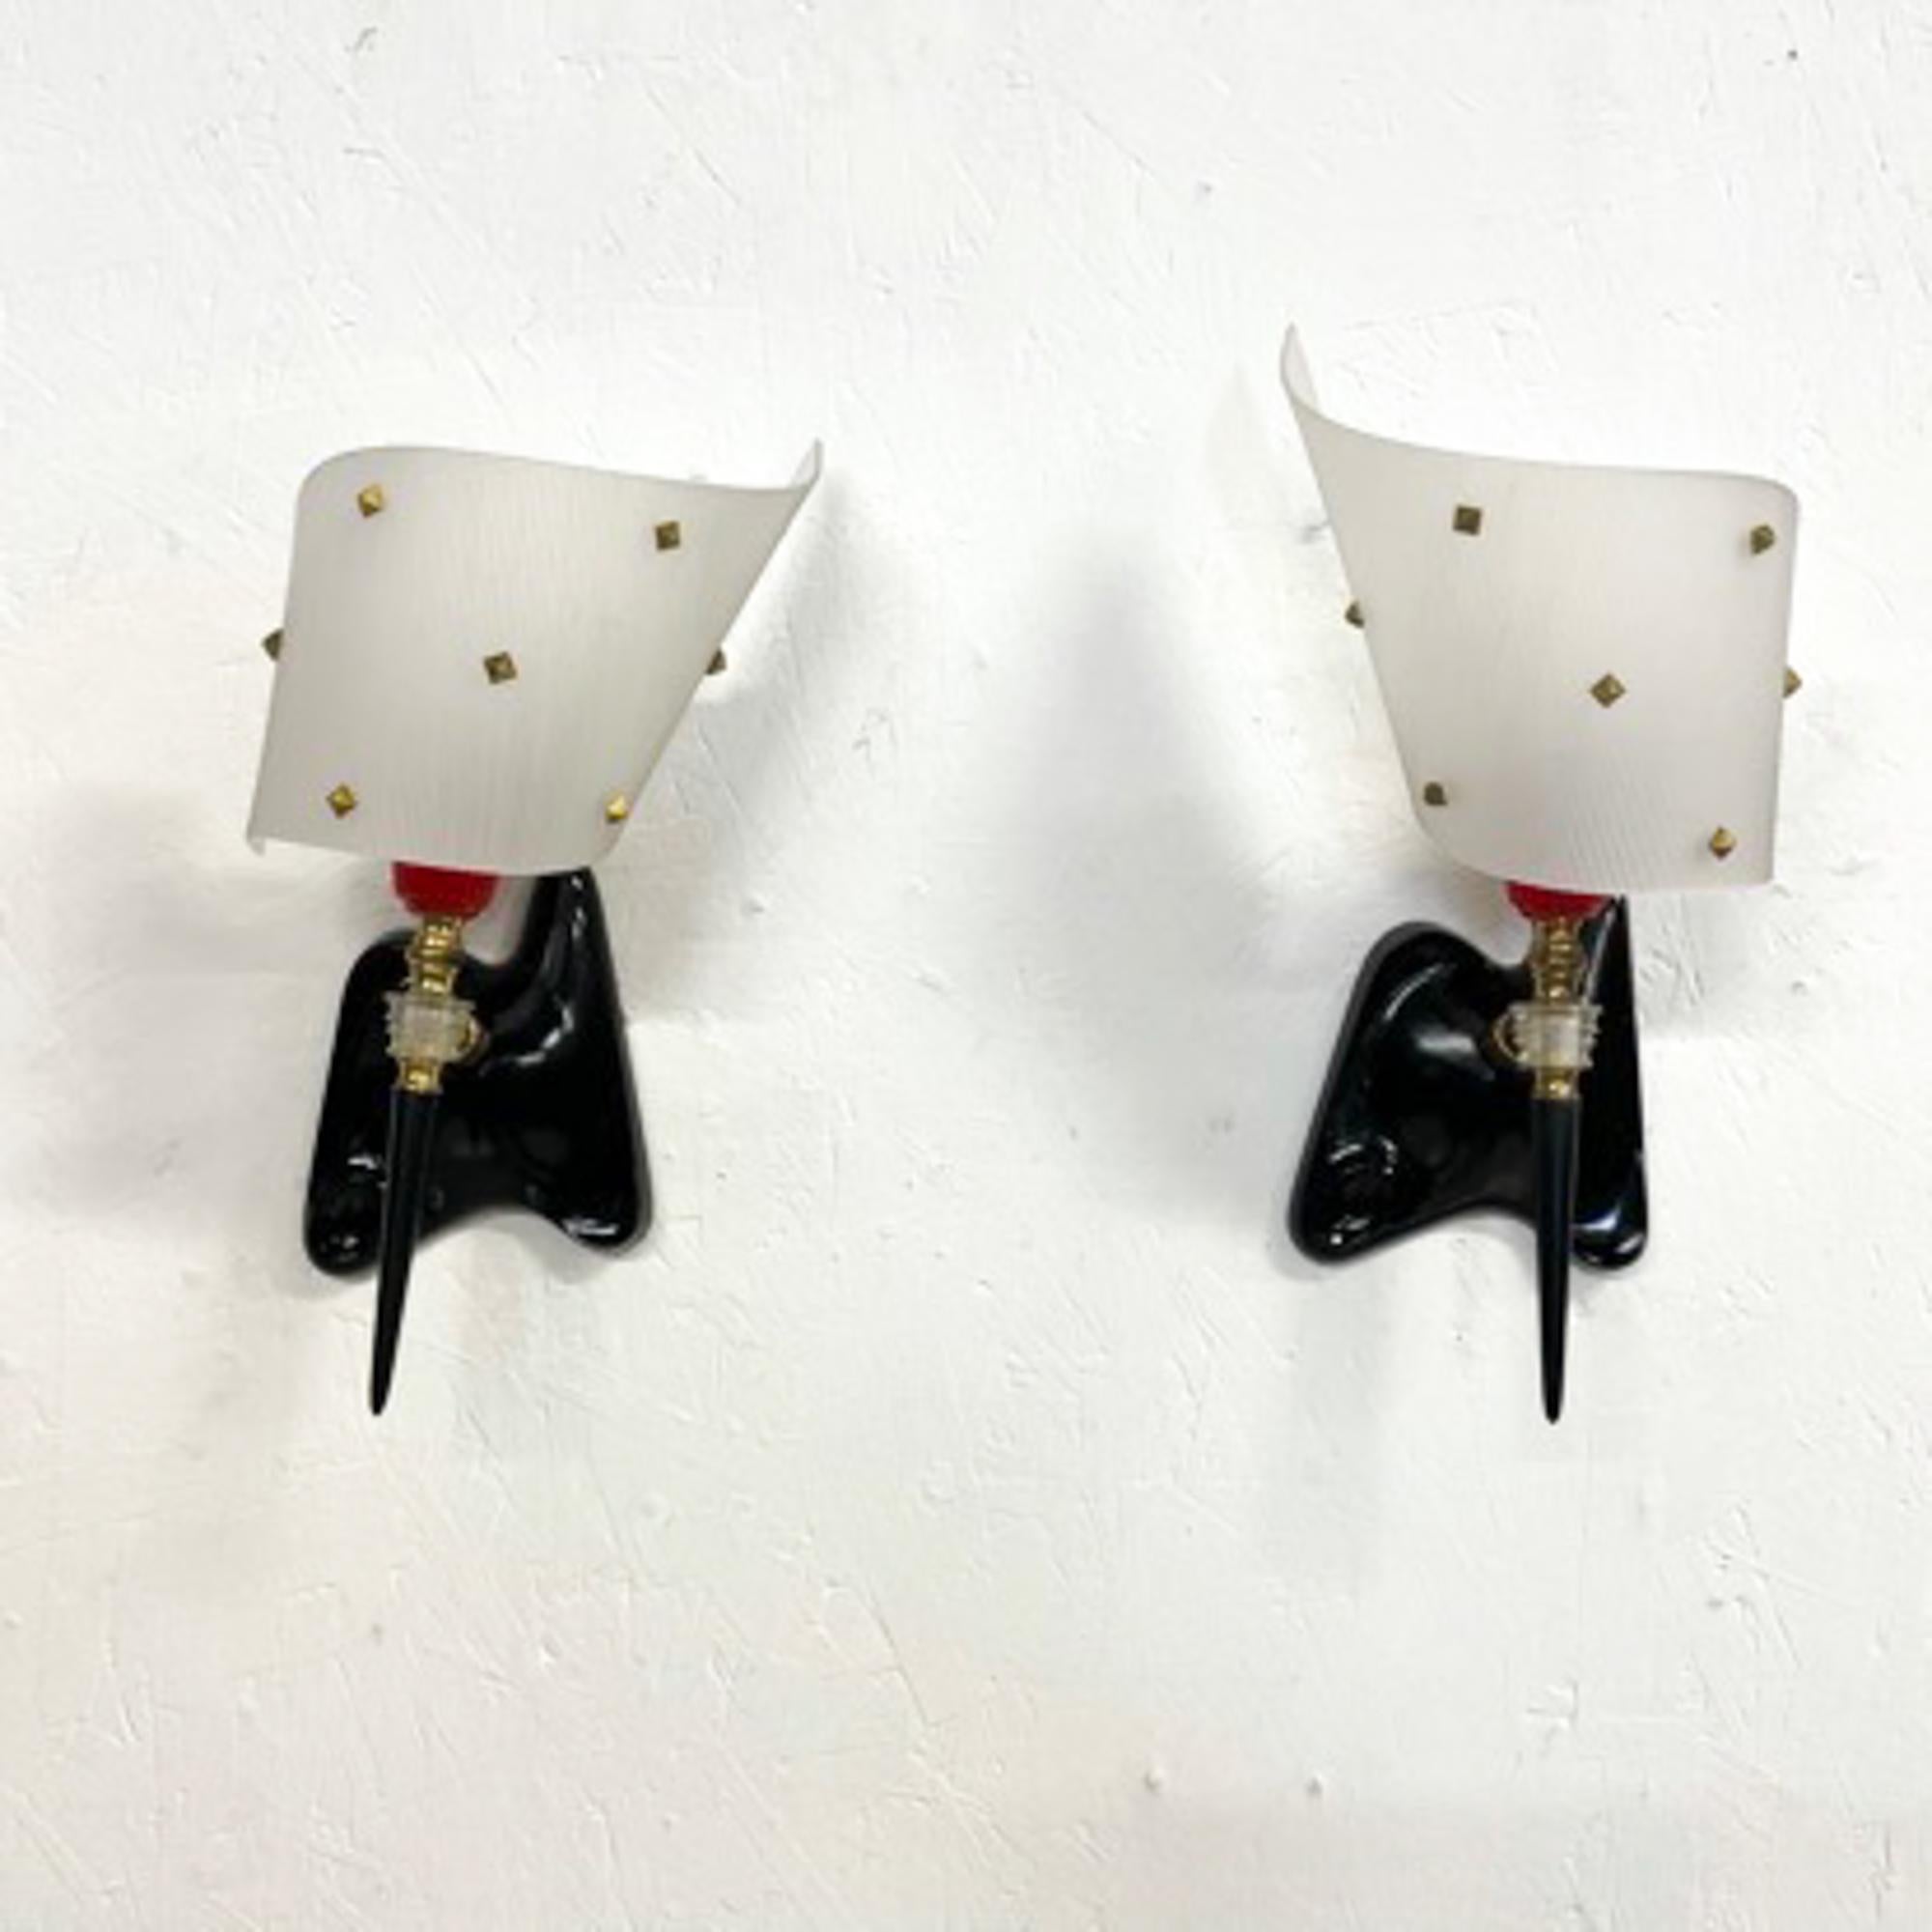 For your consideration a pair of French wall sconces. Sculptural shape with black wall mount and plexiglass-plastic curved shades in white opaline color (translucent). The shades are decorated with brass diamond shape studs. 

Made in France Circa